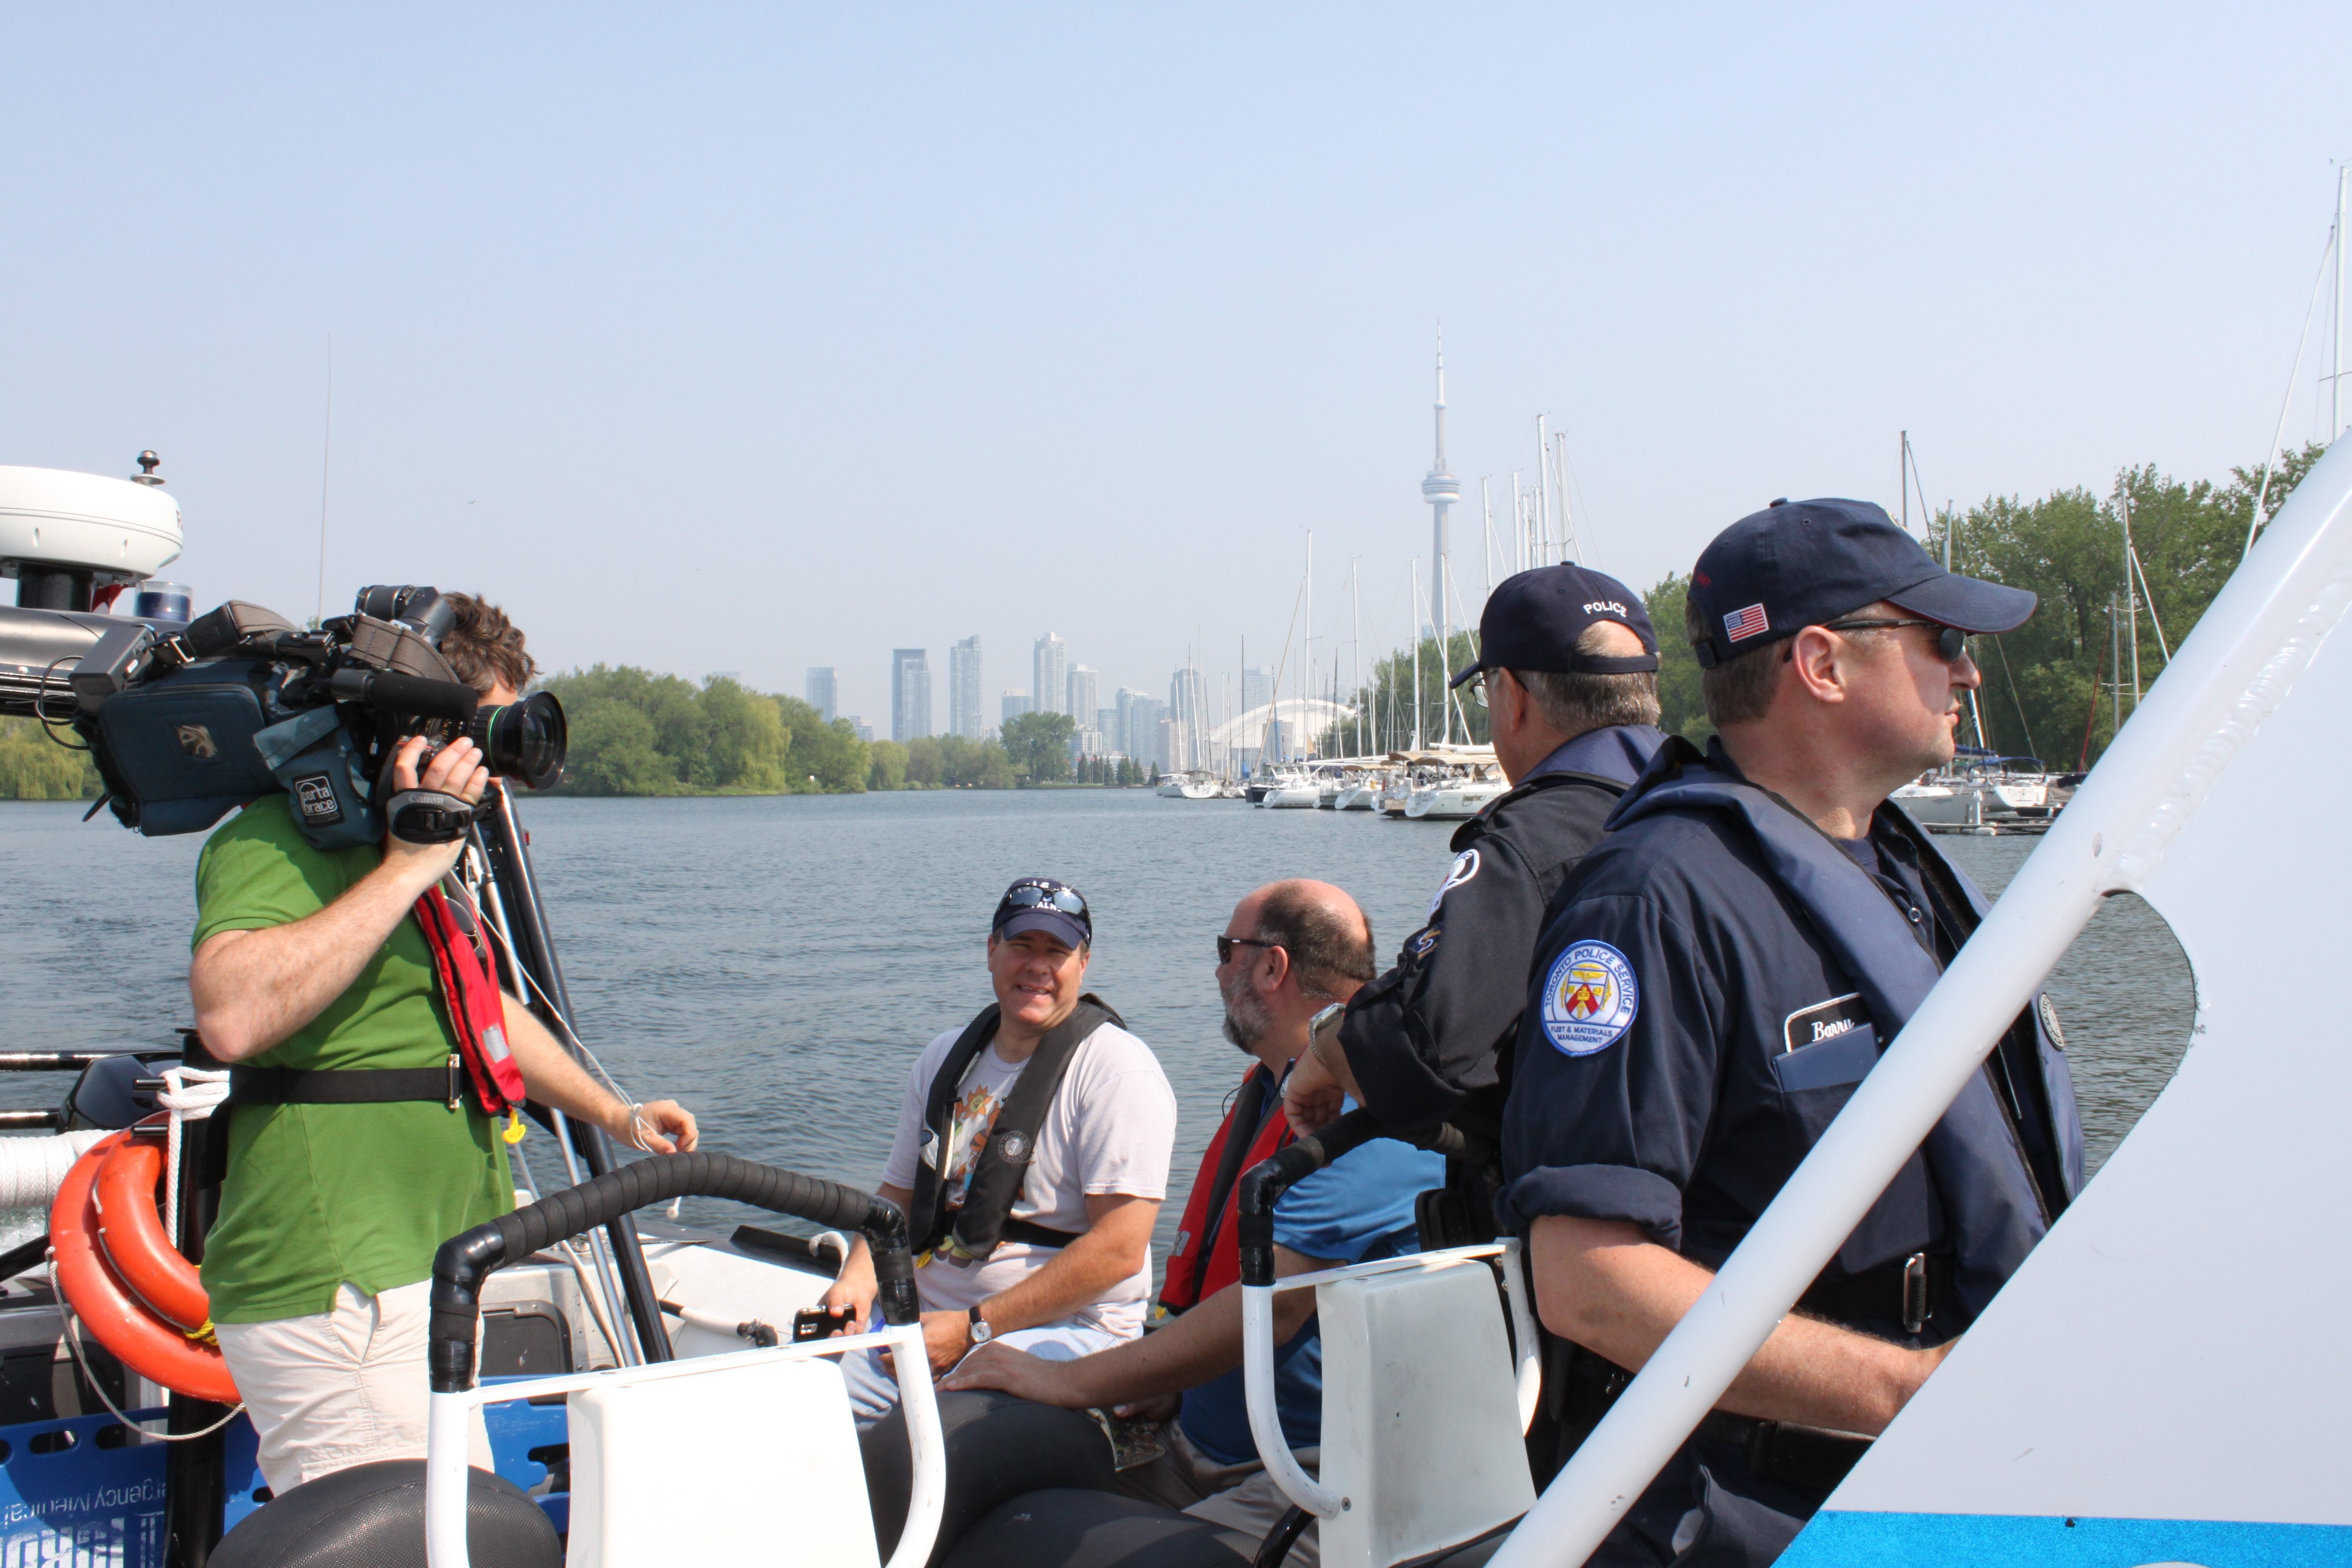 Out on the water doing water safety video